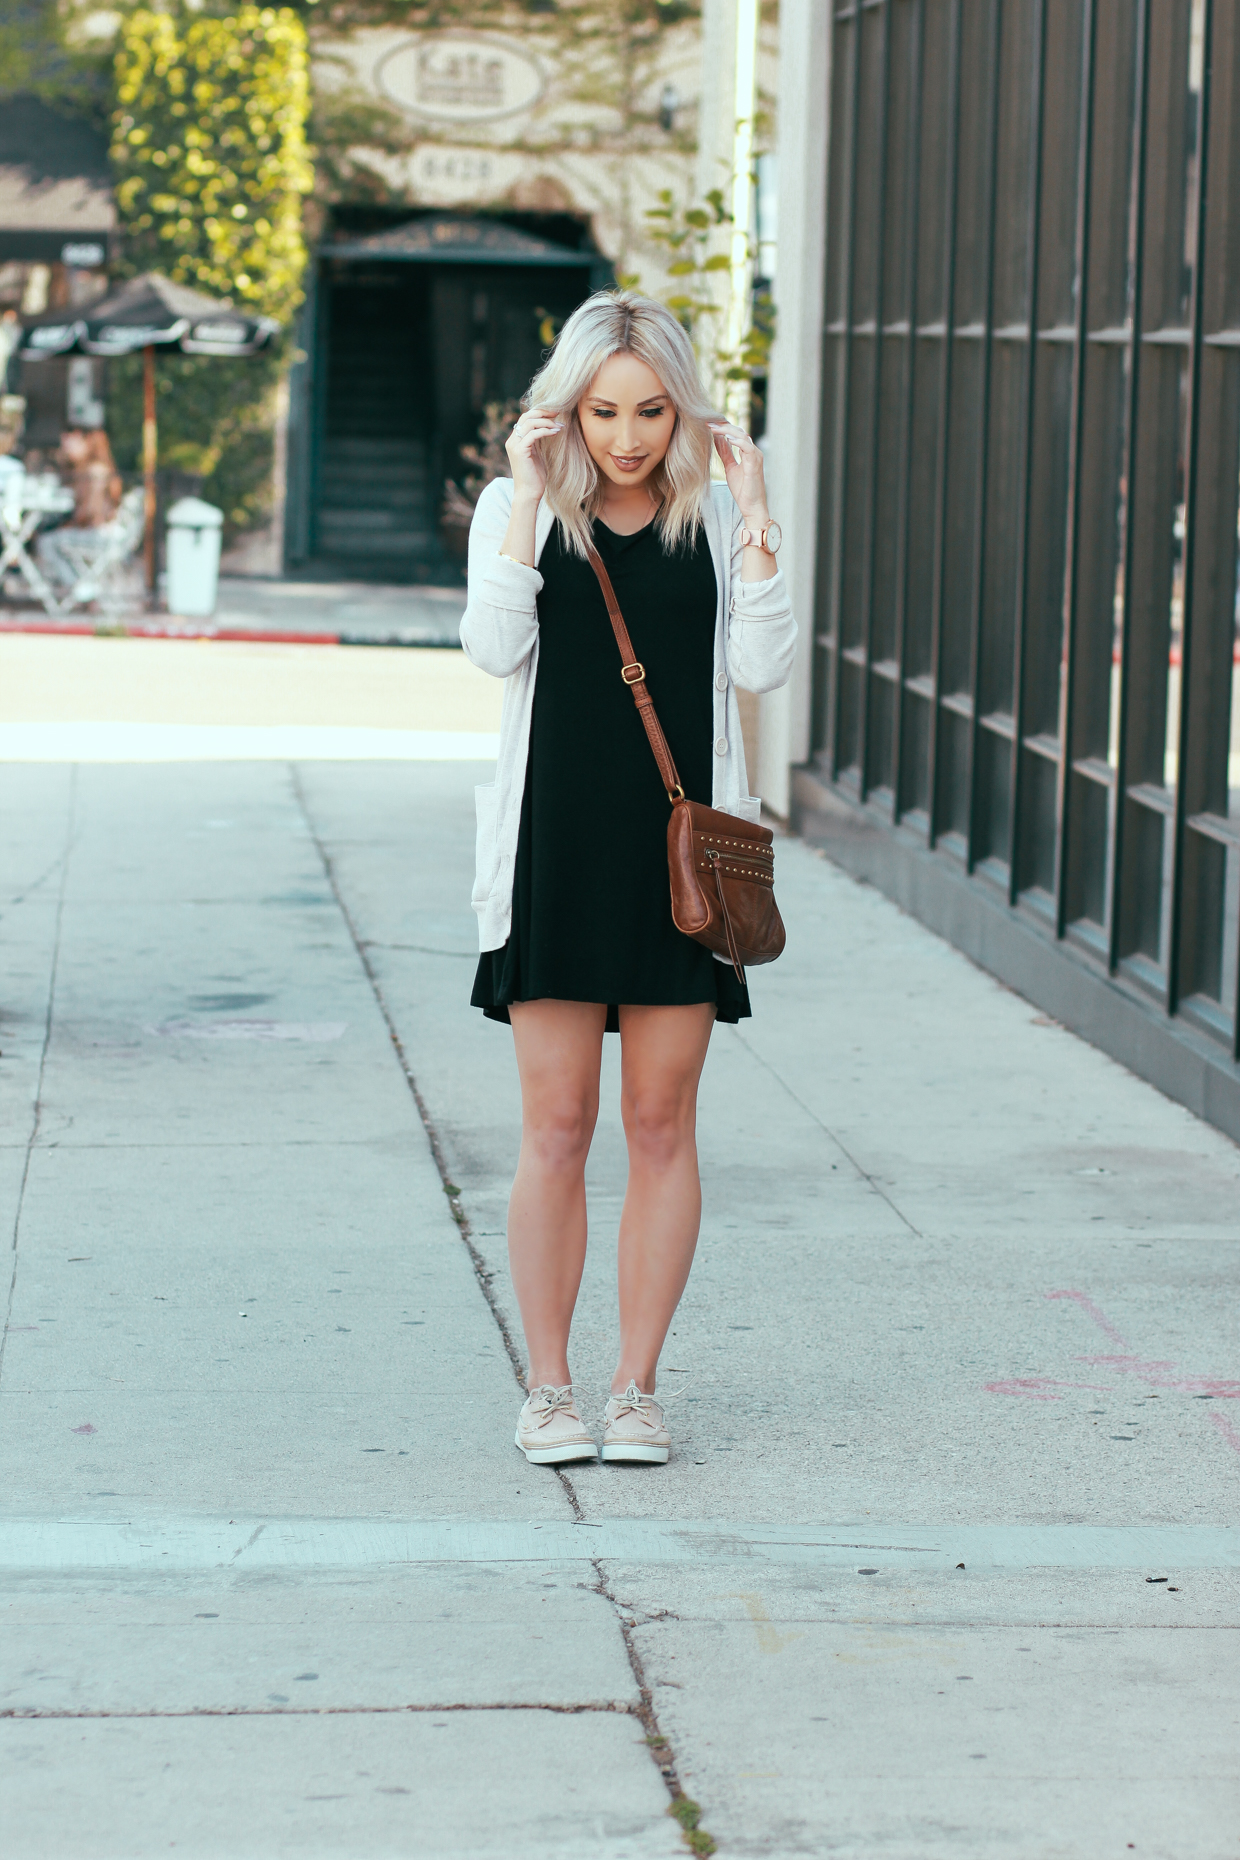 Blondie in the City | Little Black Dress and a Light Sweater | Watch: @the_fifth | Shoes: Sperry's from @rwfootwear